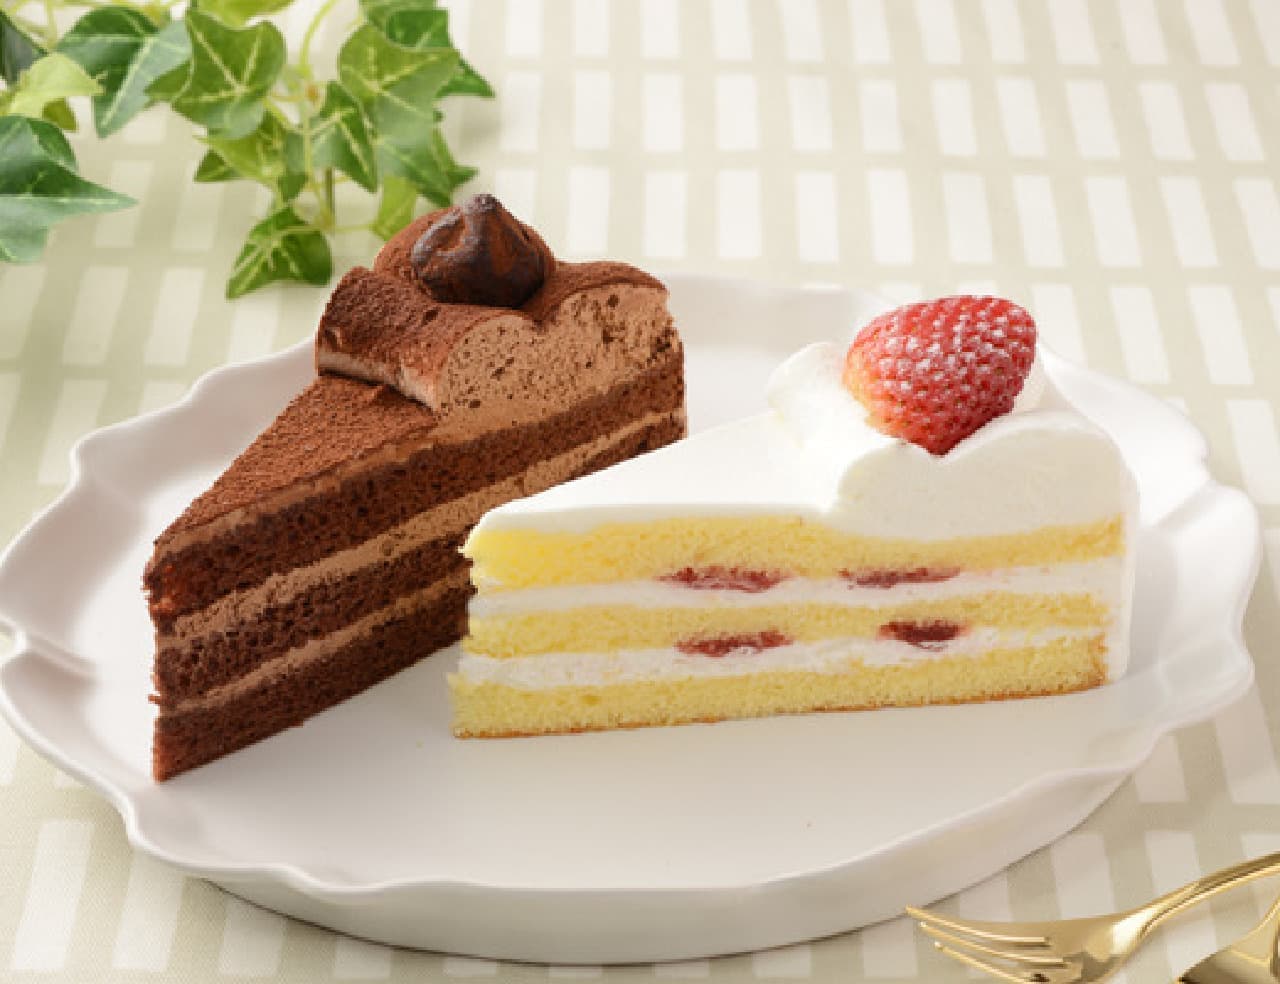 Lawson "Party Cake - Strawberry & Chocolate